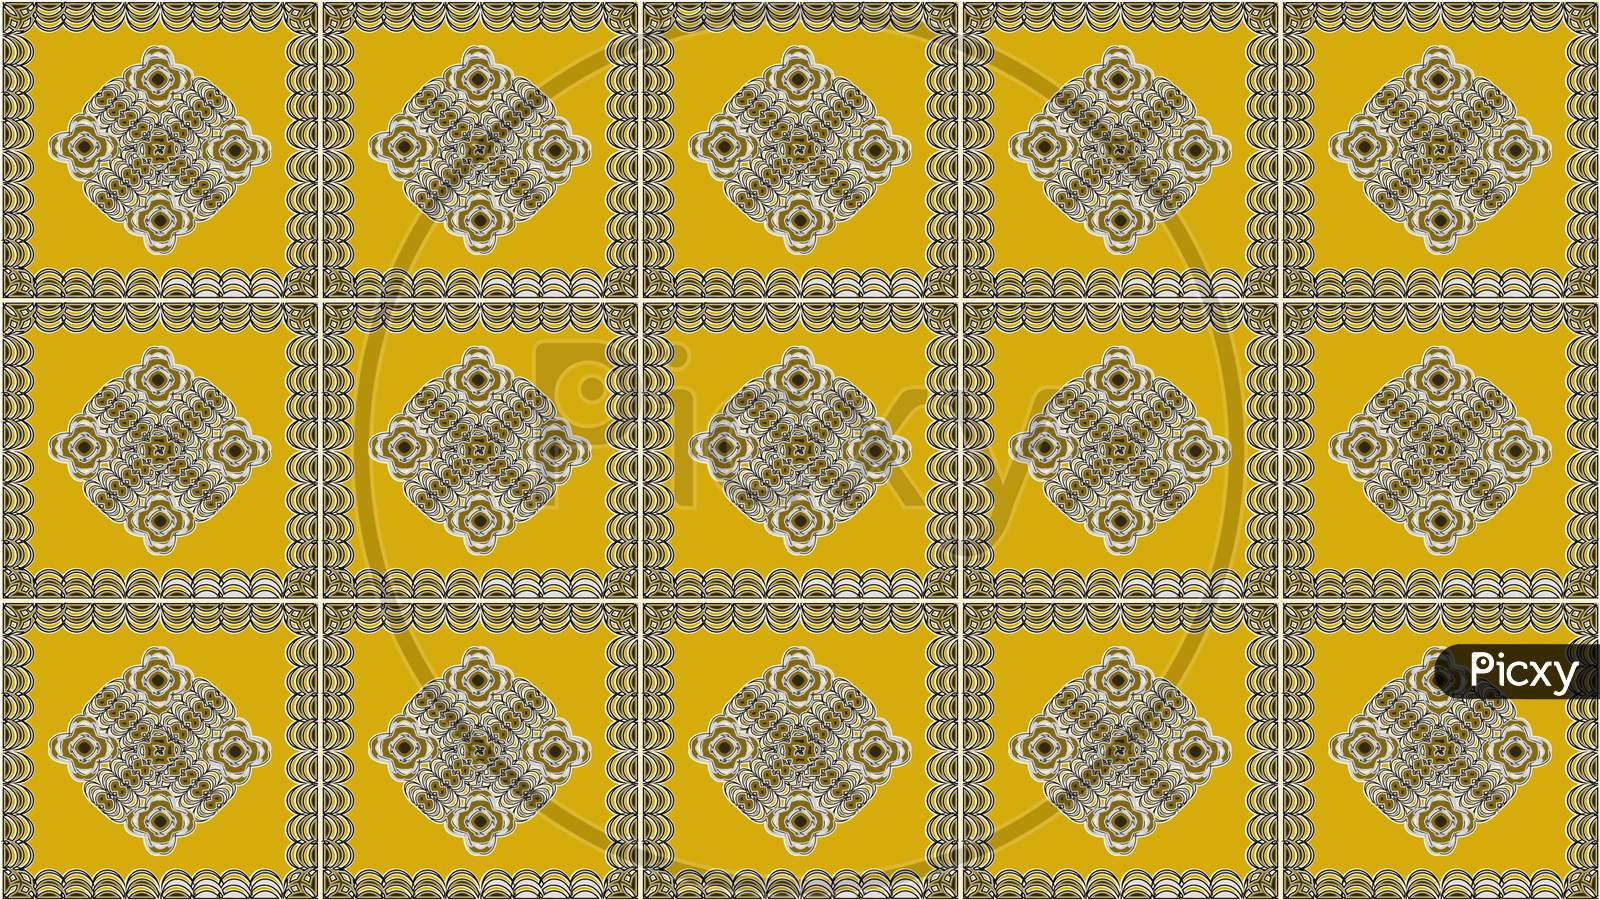 Image Of A Yellow Color, Square Shape, Abstract Pattern, Graphic Design.